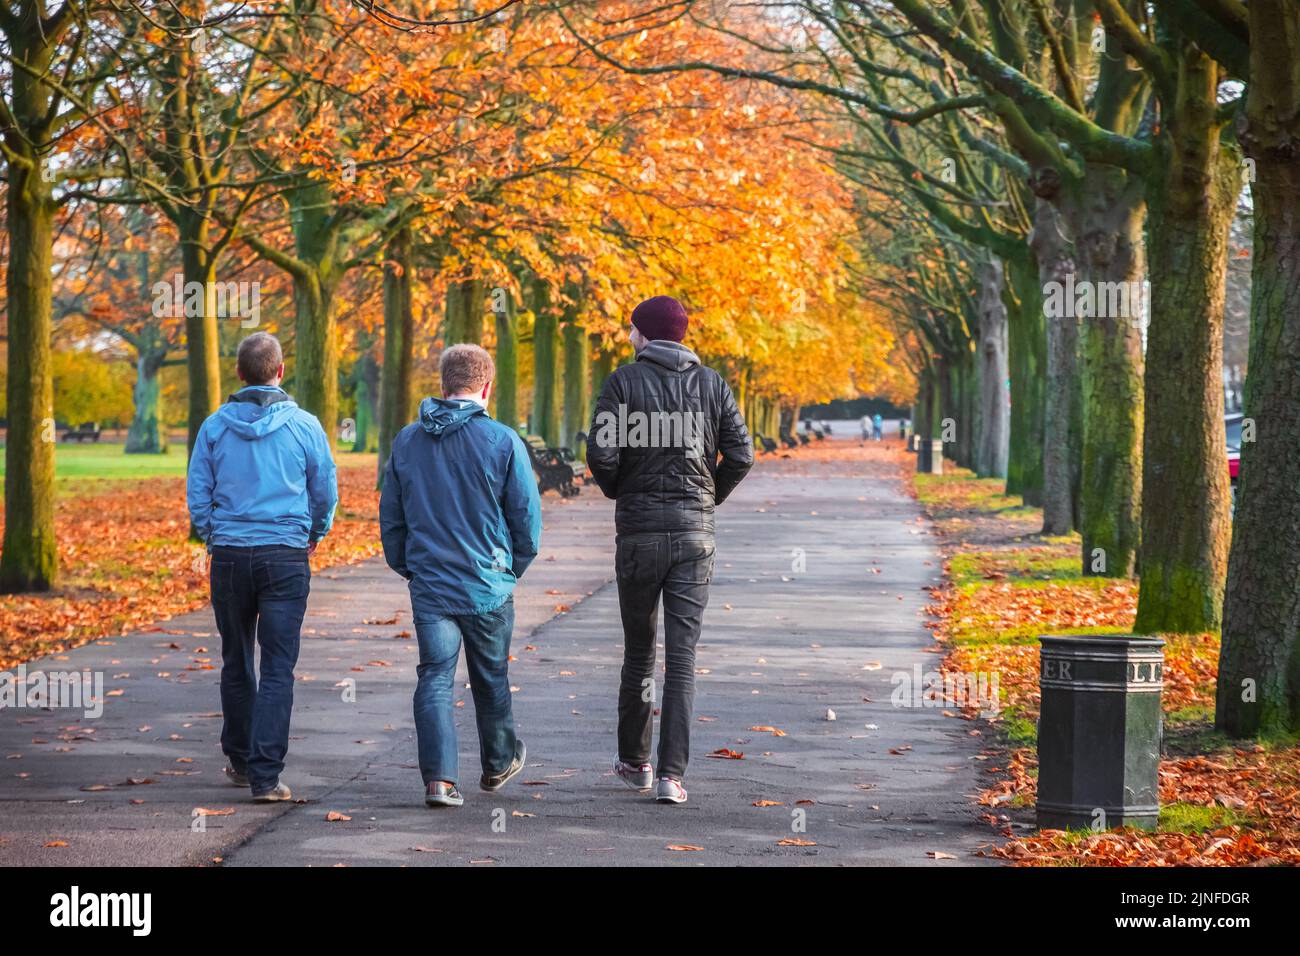 London, UK - November 3, 2021 - Back view of three men walking on a treelined path in Greenwich park during autumn season Stock Photo